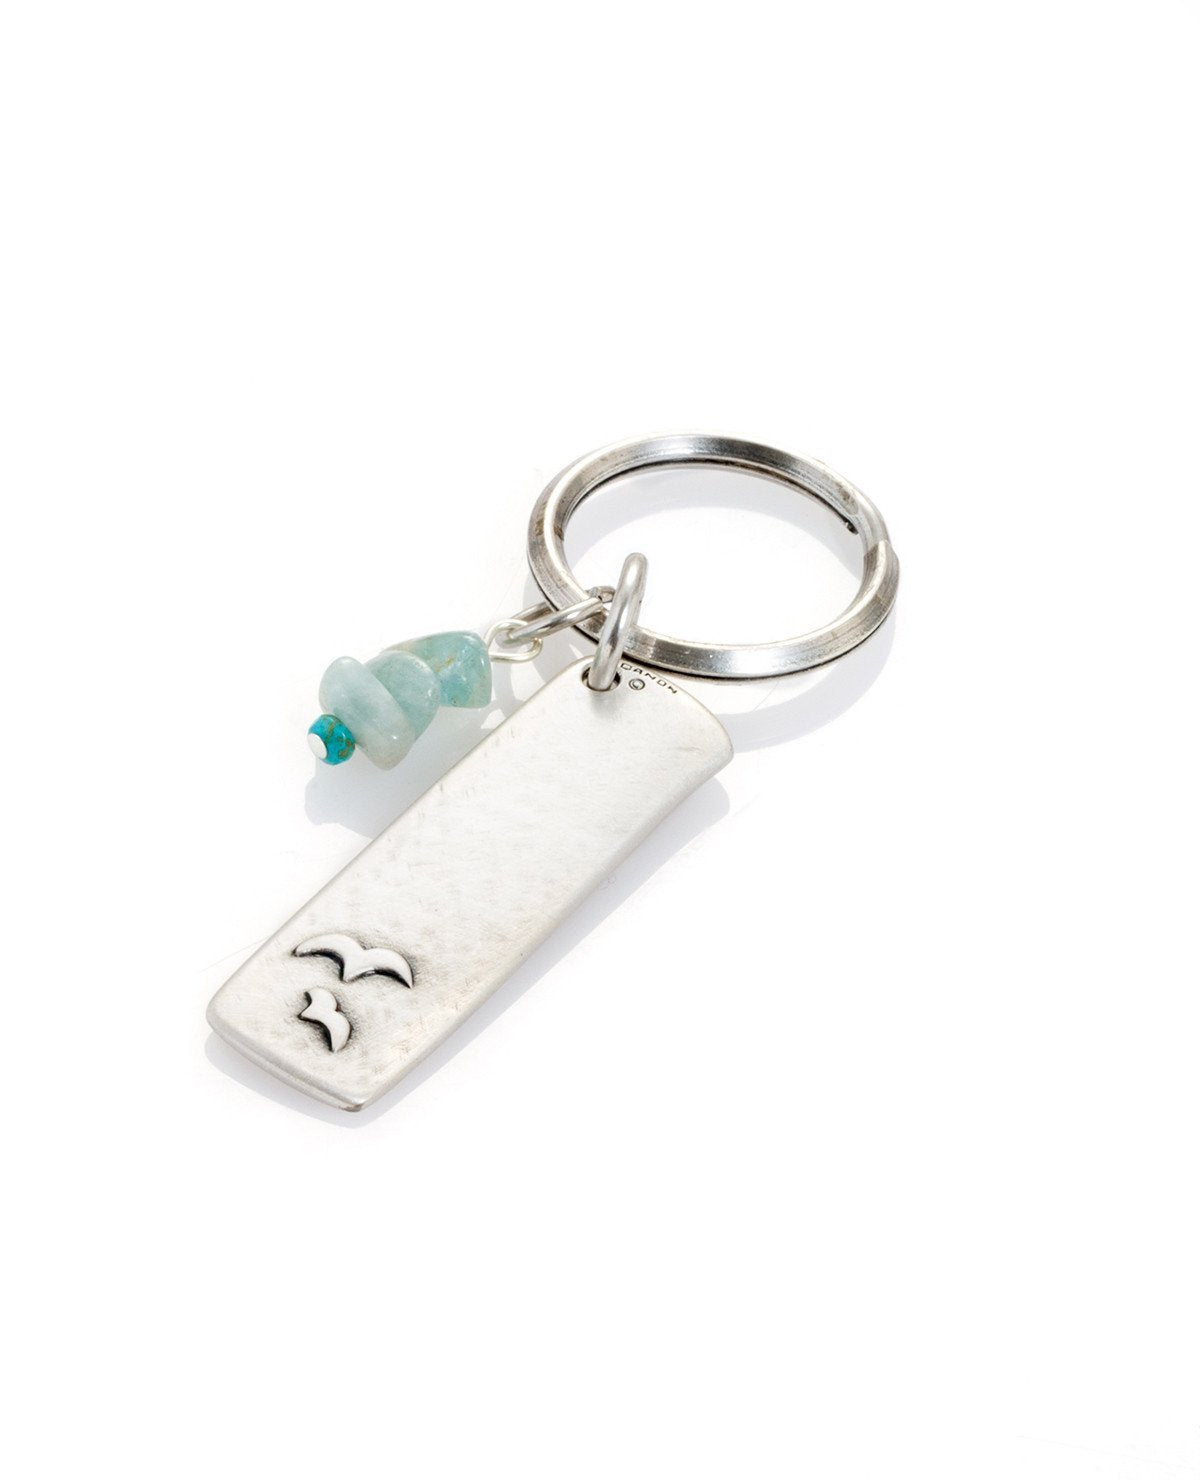 Sterling silver plated key ring with beads.  Length: 5 cm  Width: 2 cm